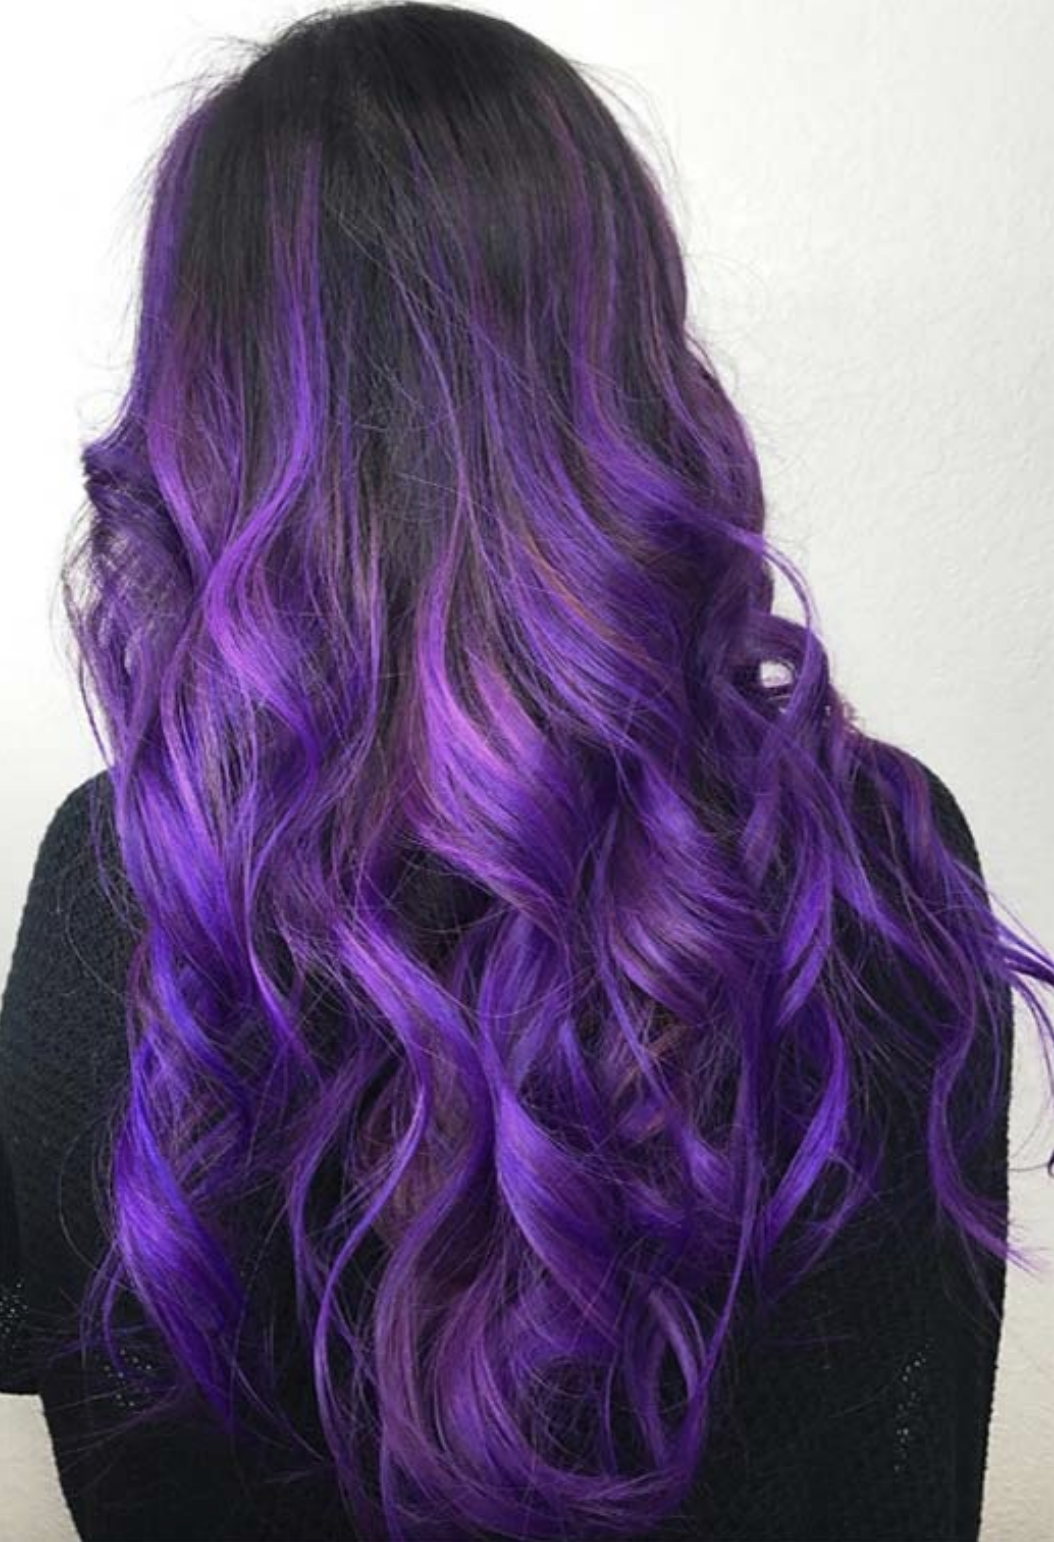 LIGHT PURPLE HAIR COLOR IDEAS 2023 - 100+ EXAMPLES TO TRY ...